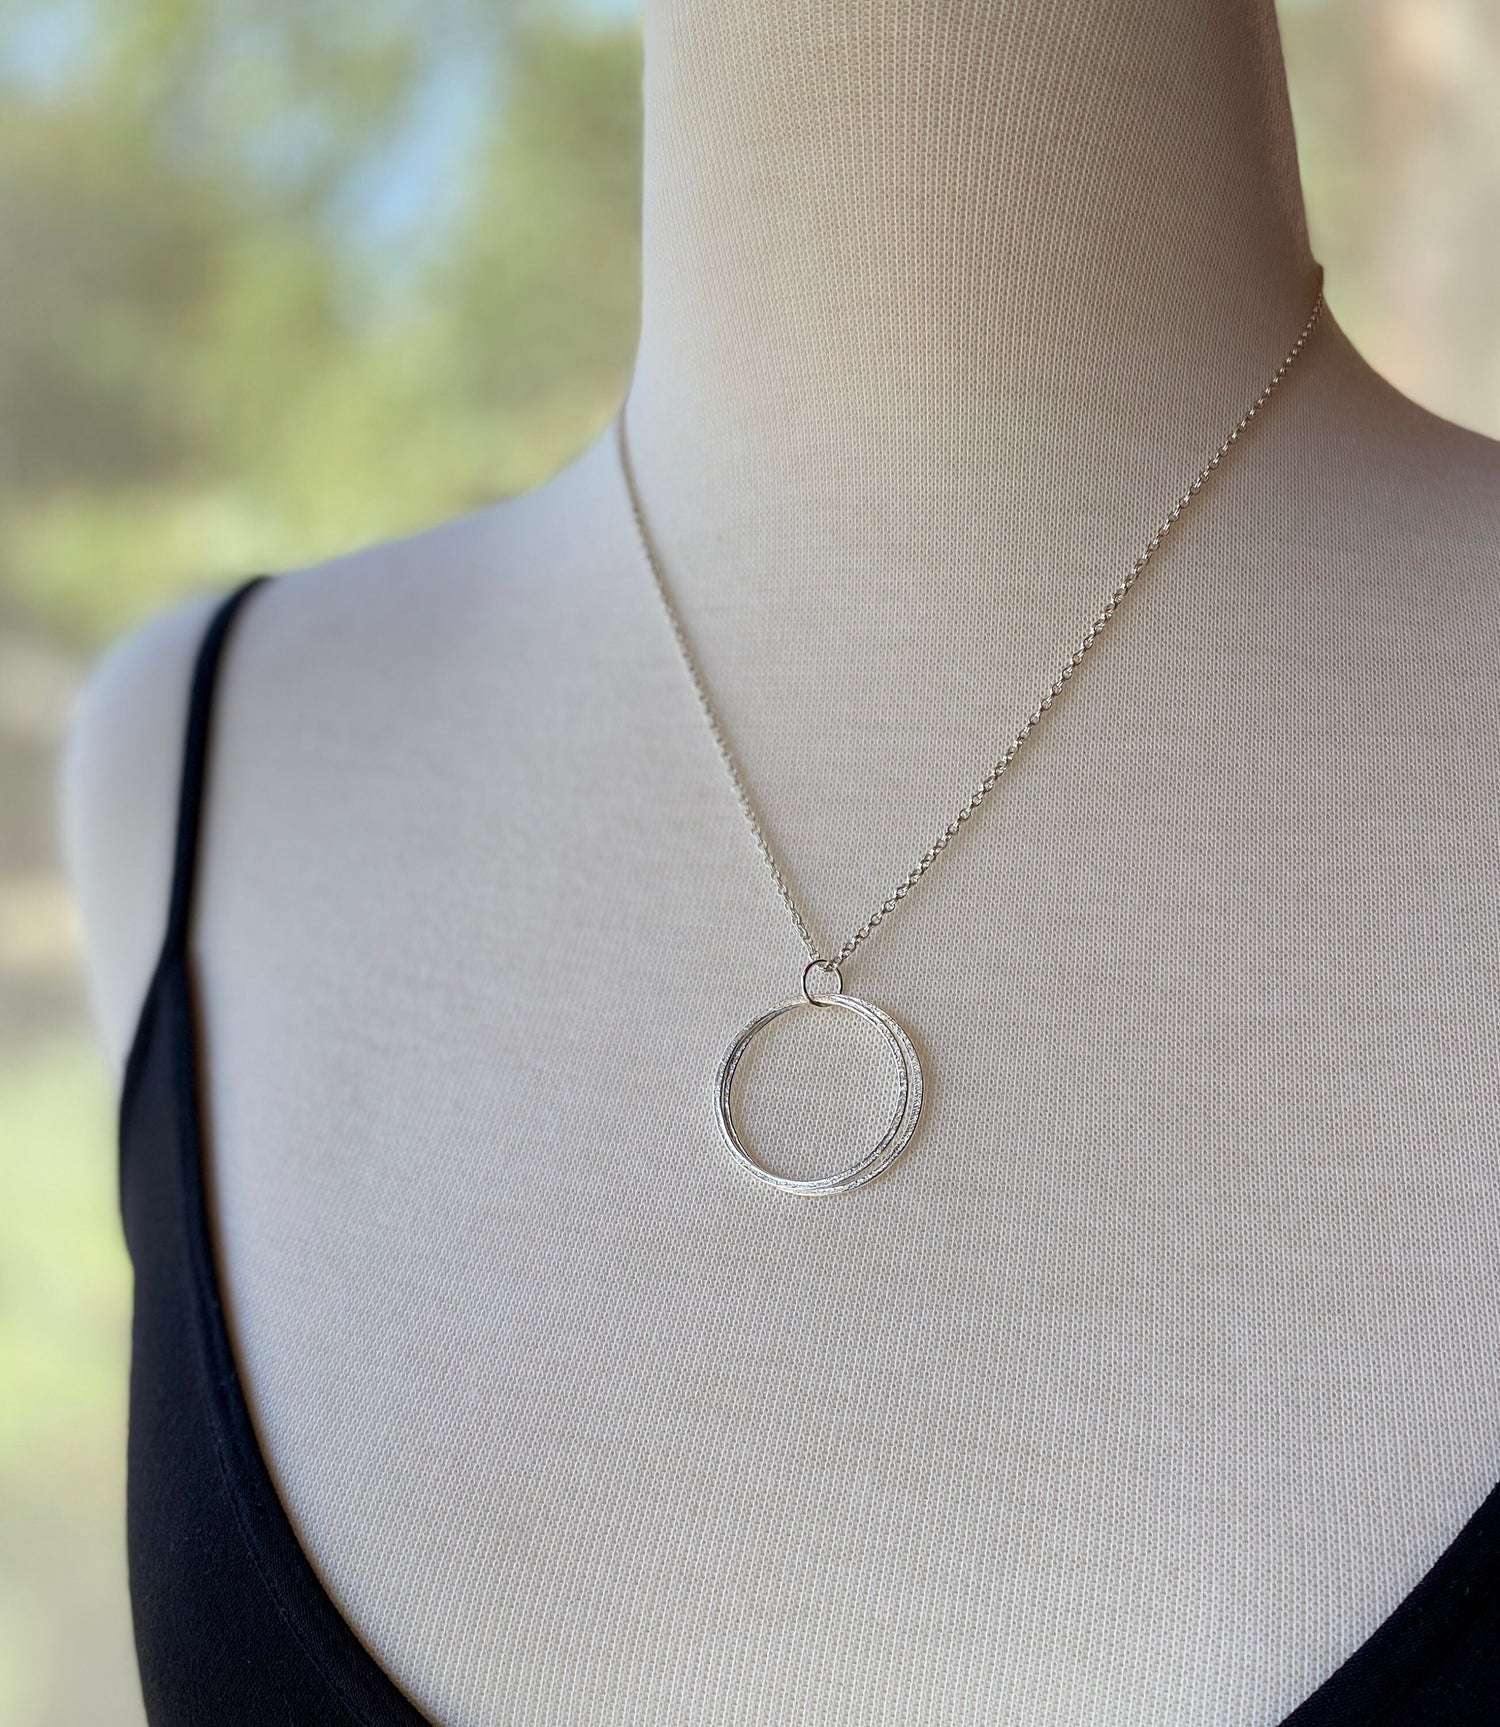 20th Birthday Bold Milestone Necklace, Sterling Silver Sparkly Circles Pendant, Unique 20th Ideas, Friendship, 2 Sisters, 2 Friends Jewelry